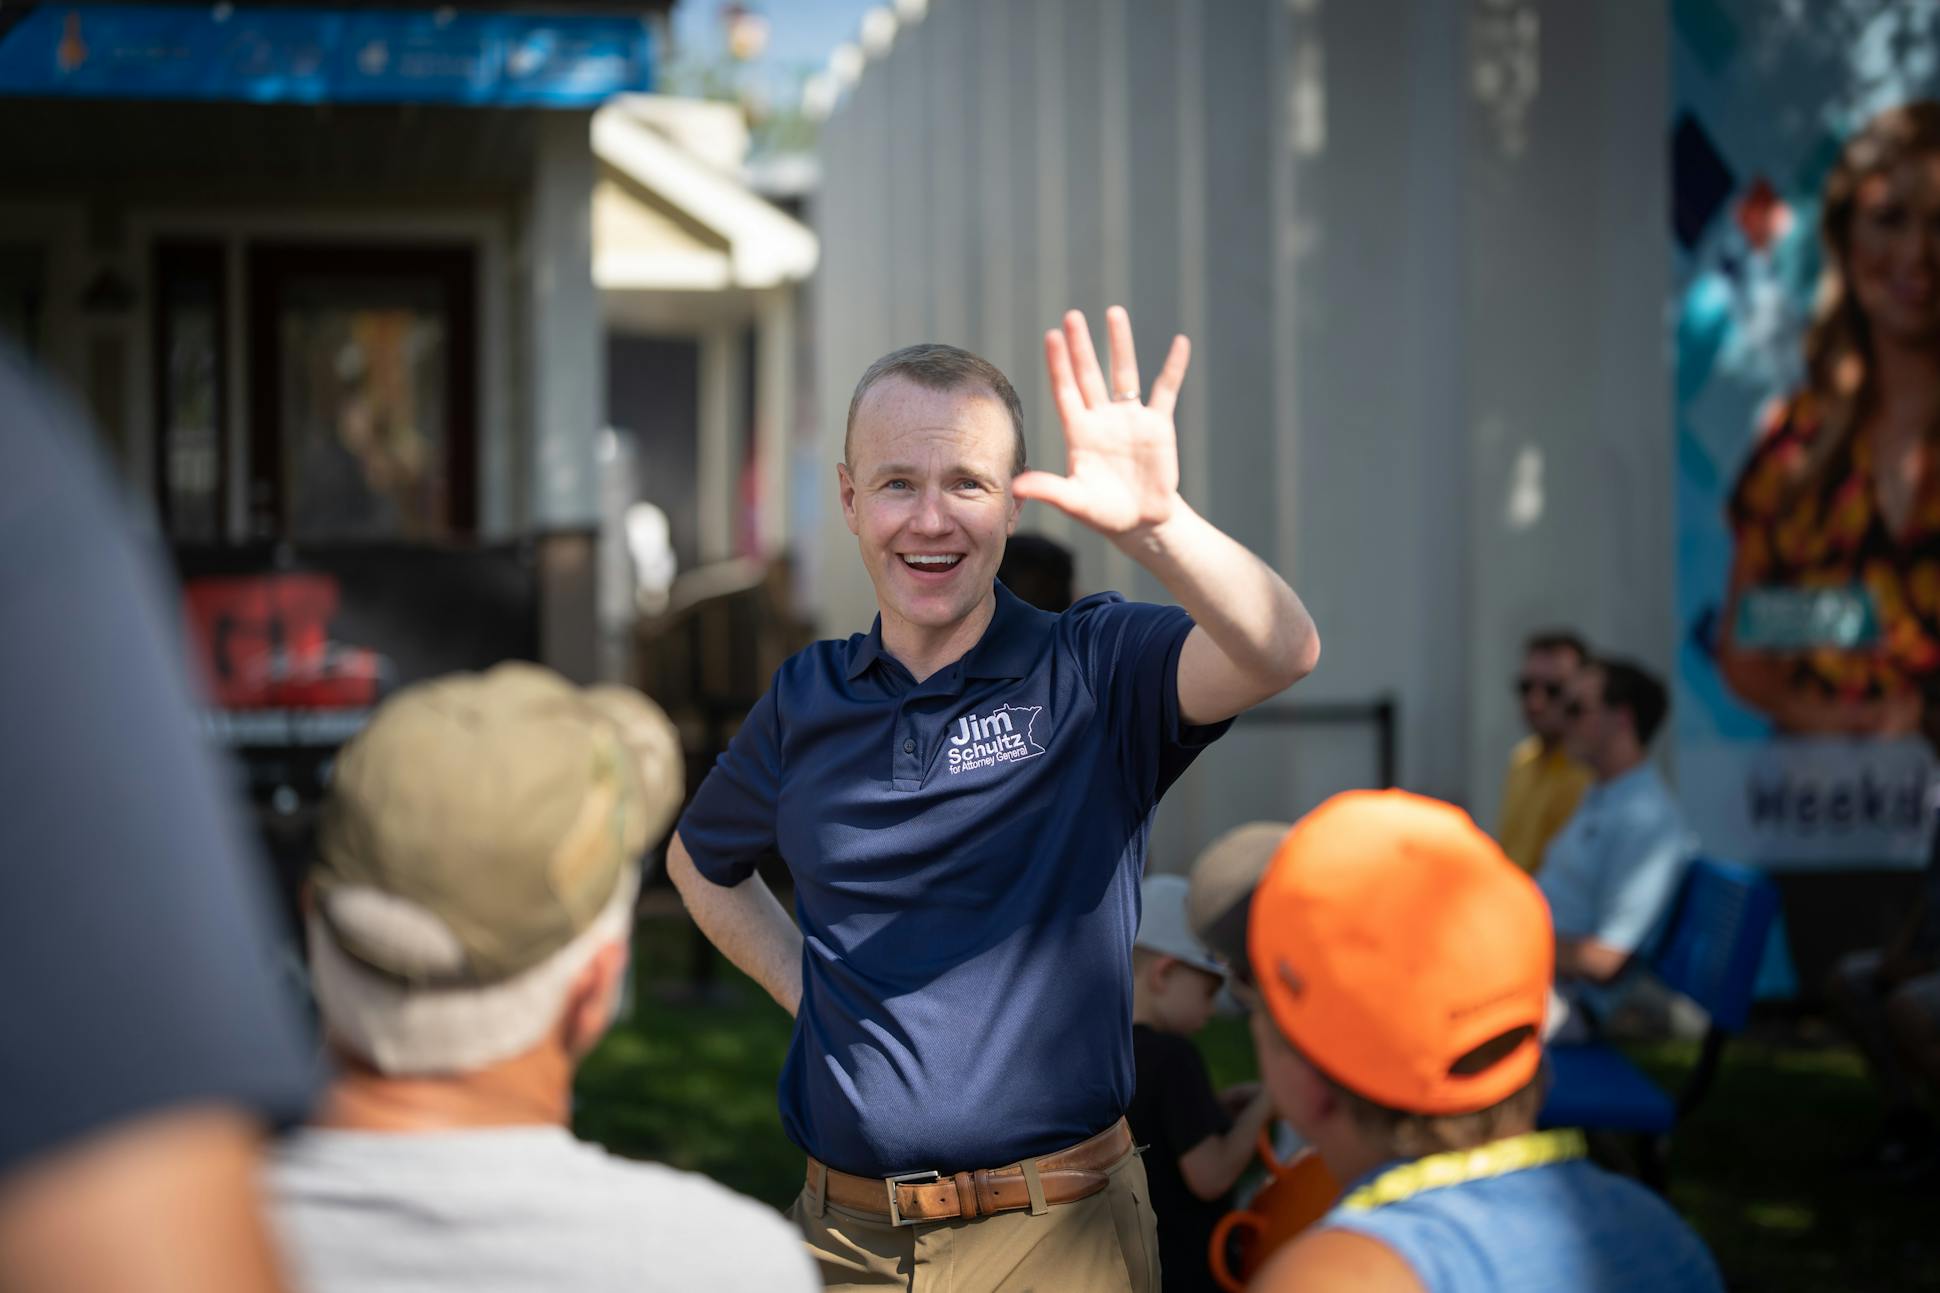 Jim Schultz, Republican candidate for state attorney general, waved as someone called his name while he talked to folks at the State Fair on Aug. 26.